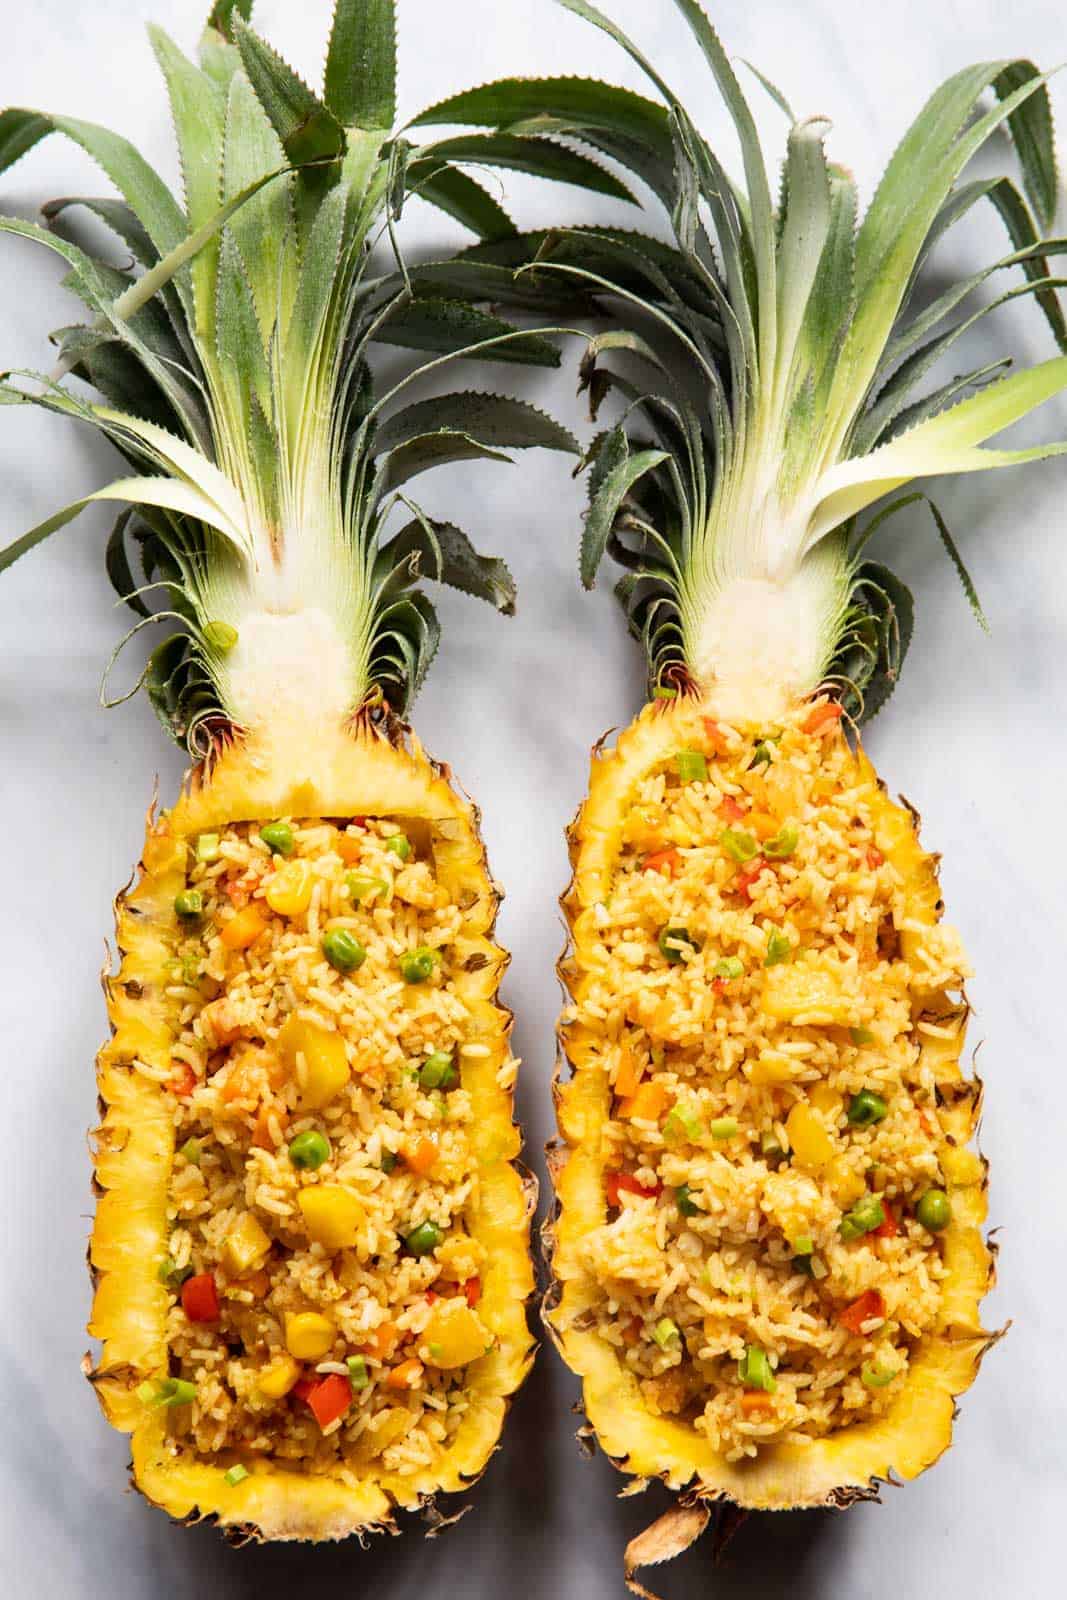 Thai Pineapple fried rice served in pineapple boats